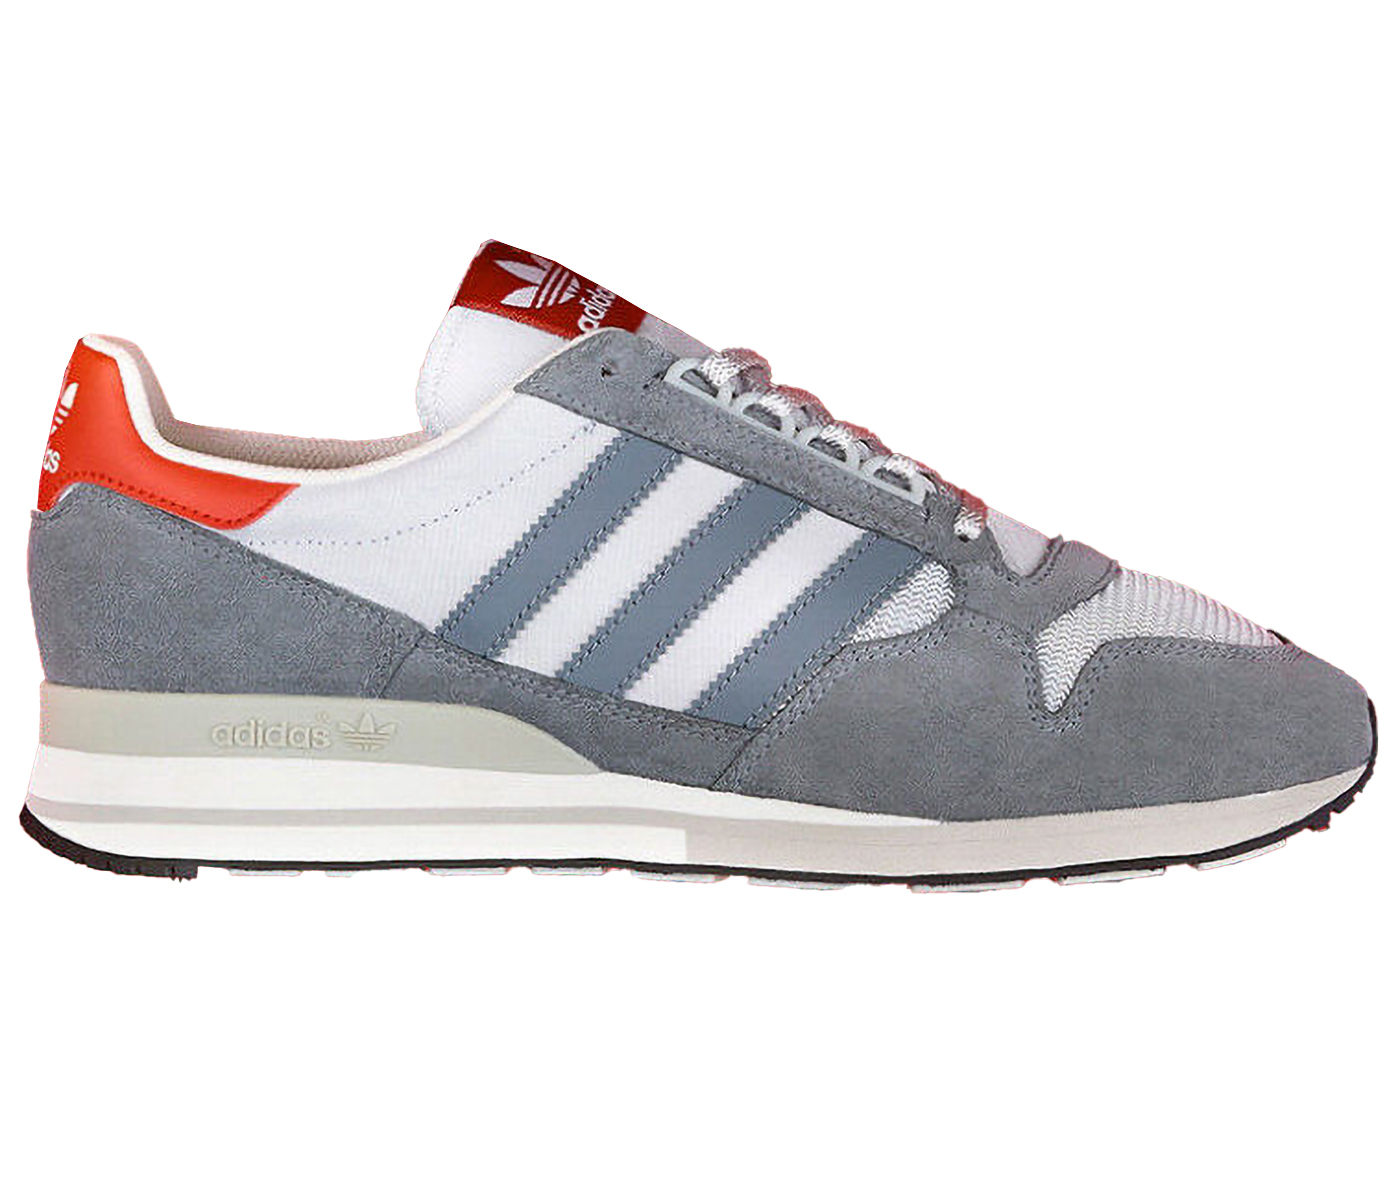 adidas ZX 500 size? Exclusive Grey White Red Men's - Q33988 - US